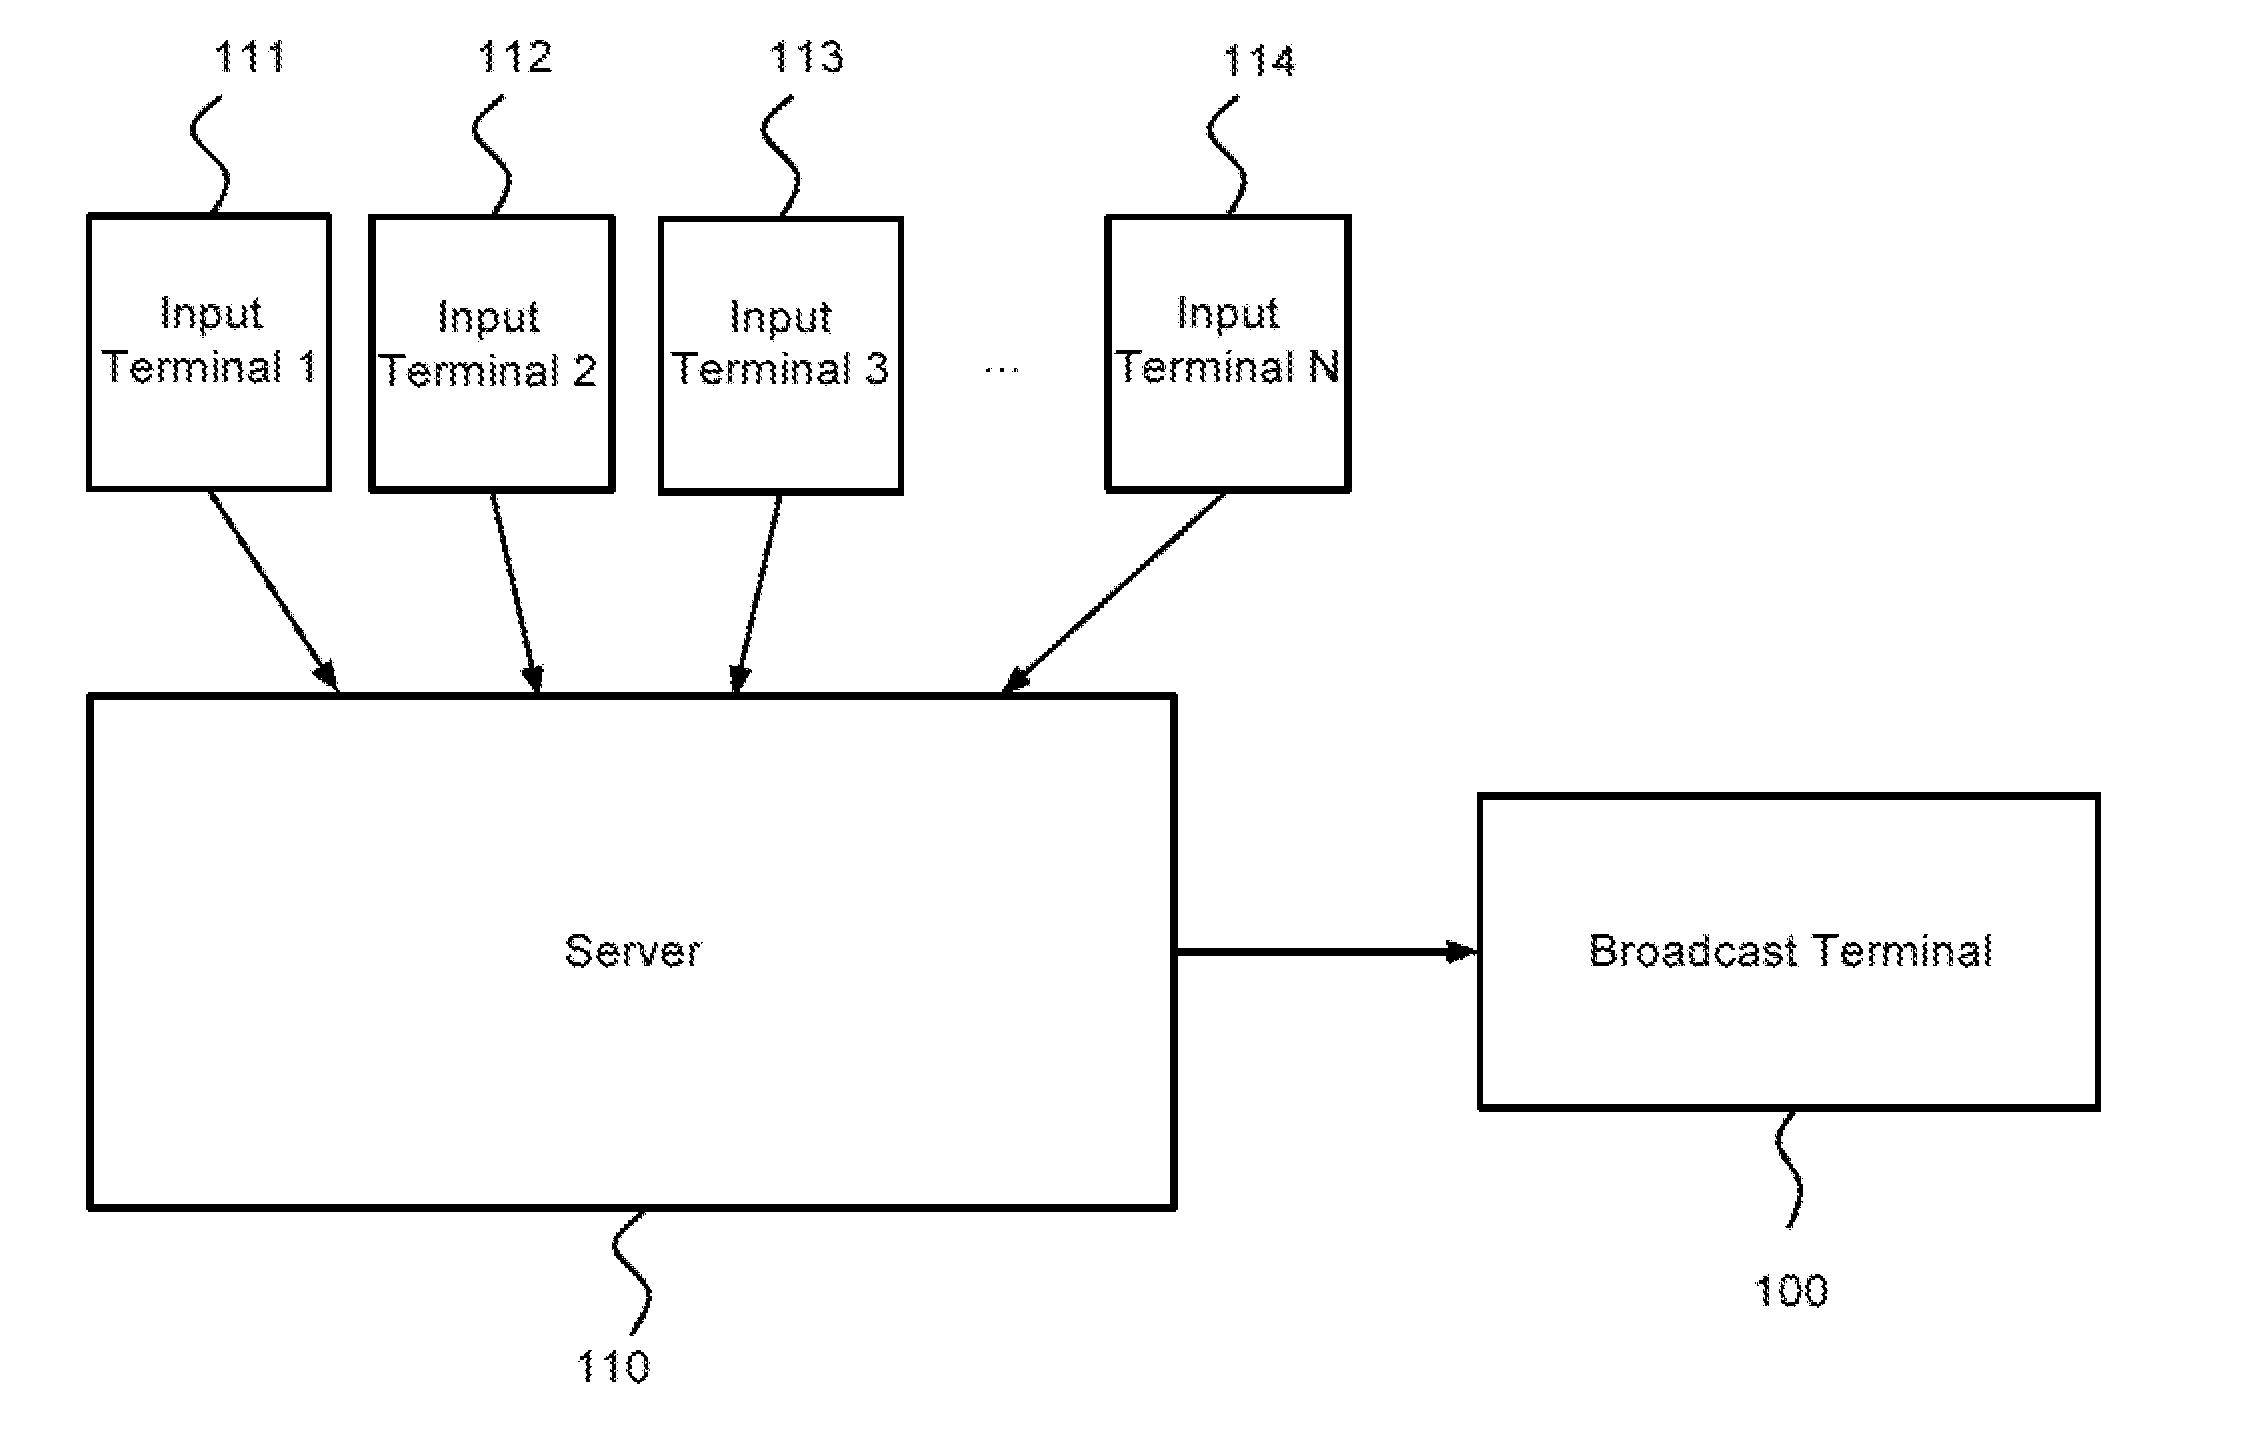 Method and Application for Batch-Based Queue Management System